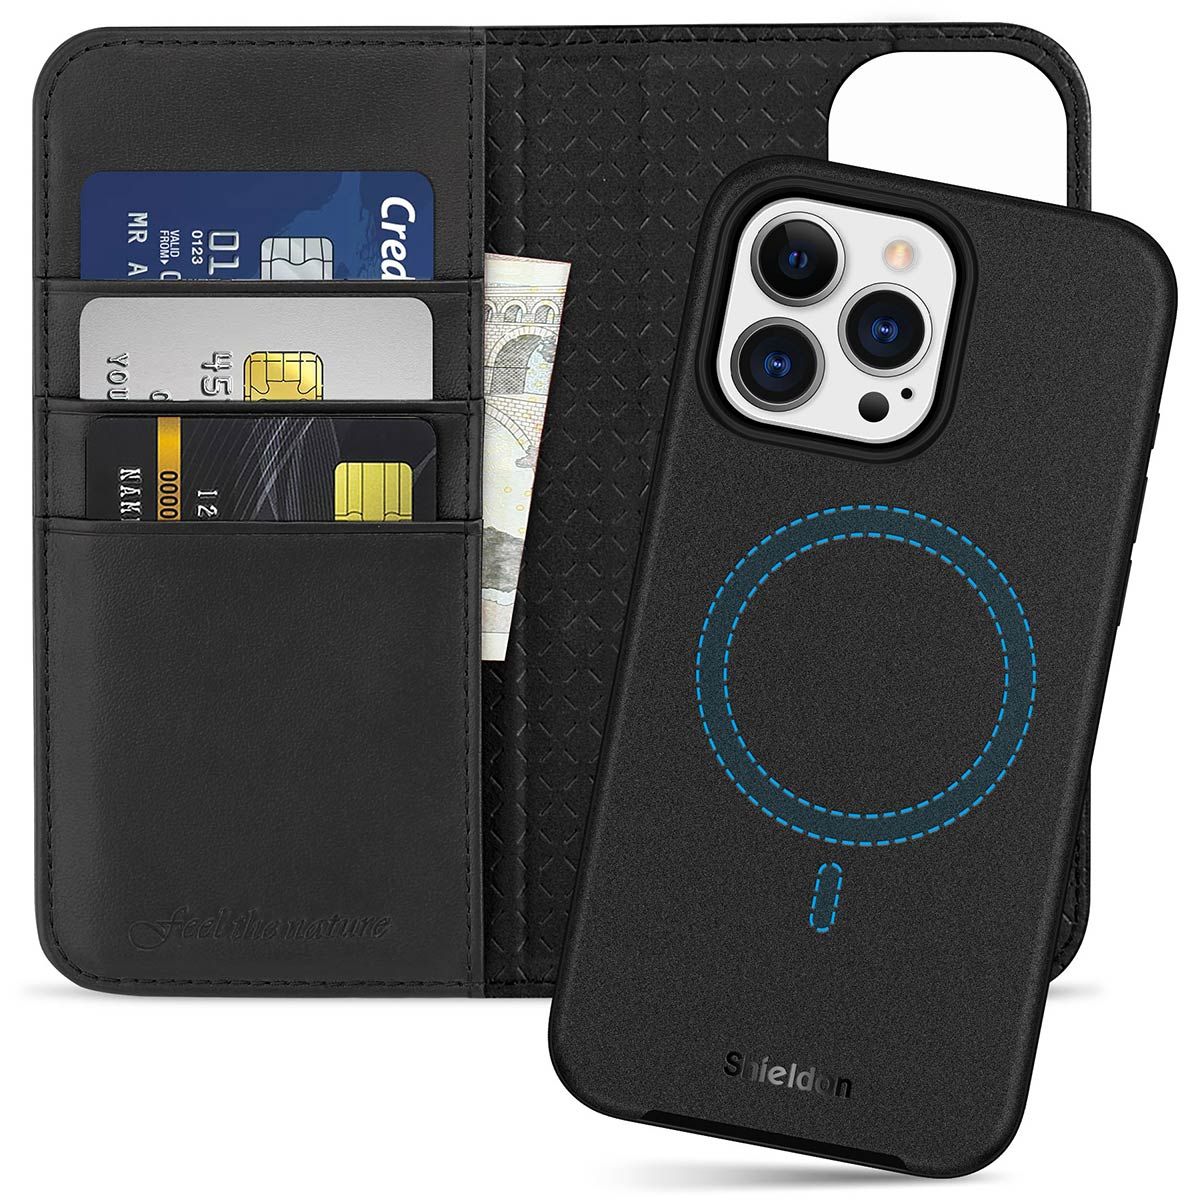 For iPhone 11 / Pro Max Wallet Case Durable Cover with Credit Card Holder  Slot